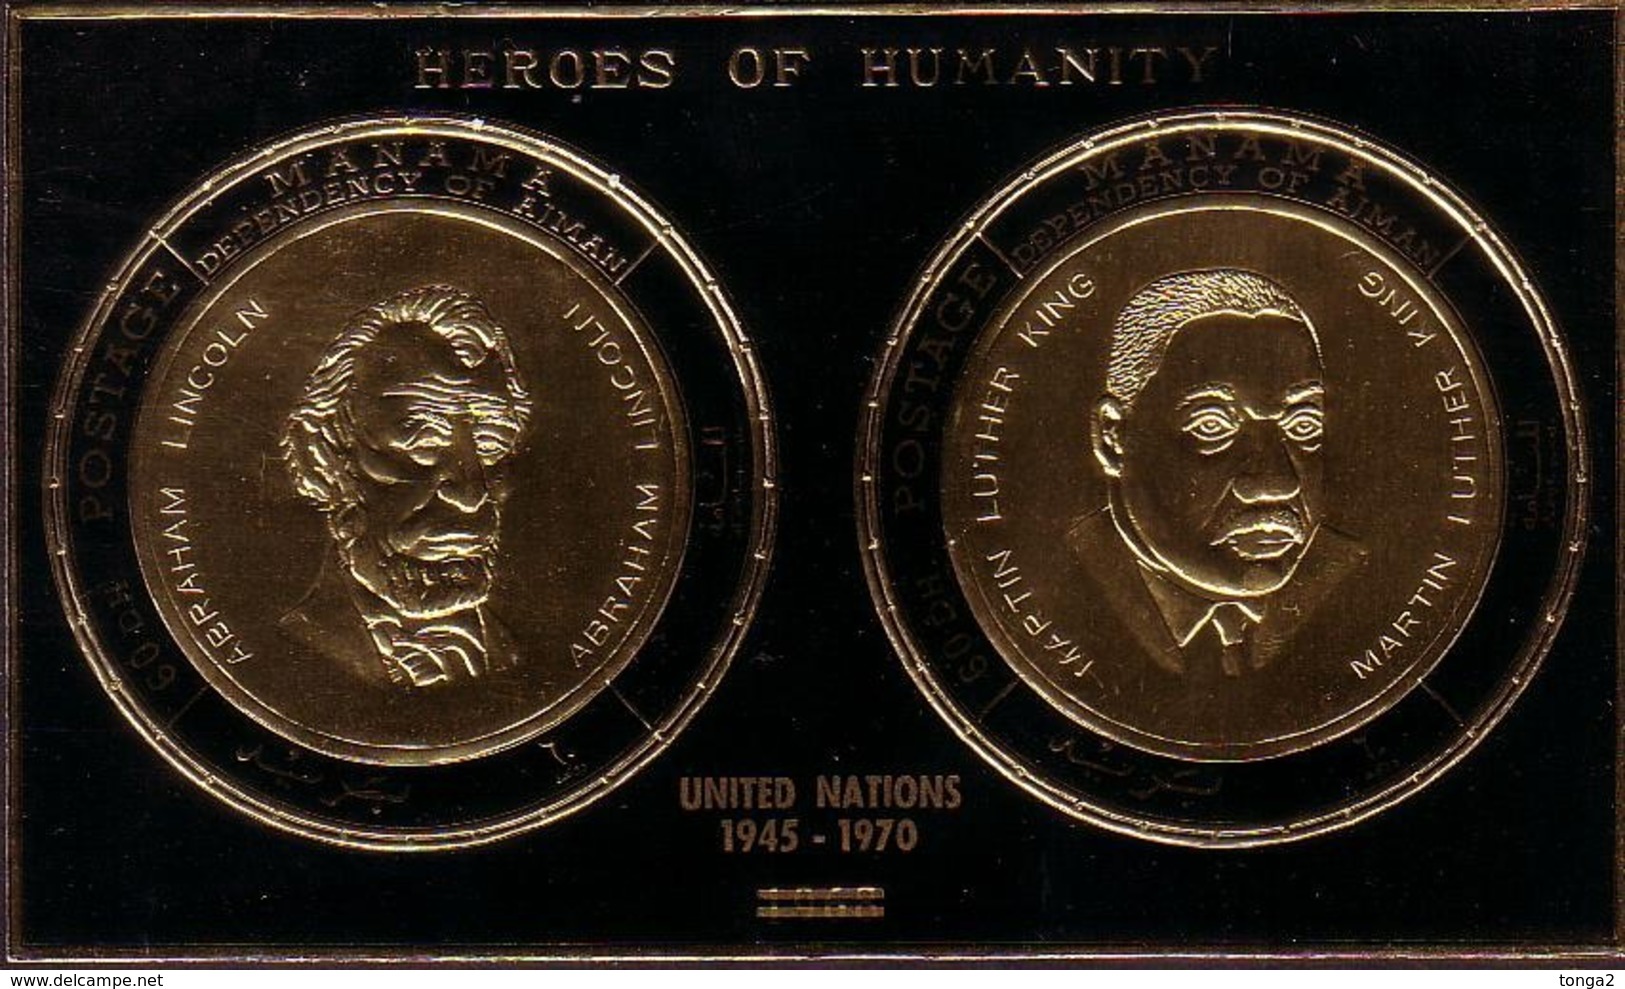 MANAMA 1970 Gold On Black S/S - Perf  - United Nations - Lincoln - King - Martin Luther King